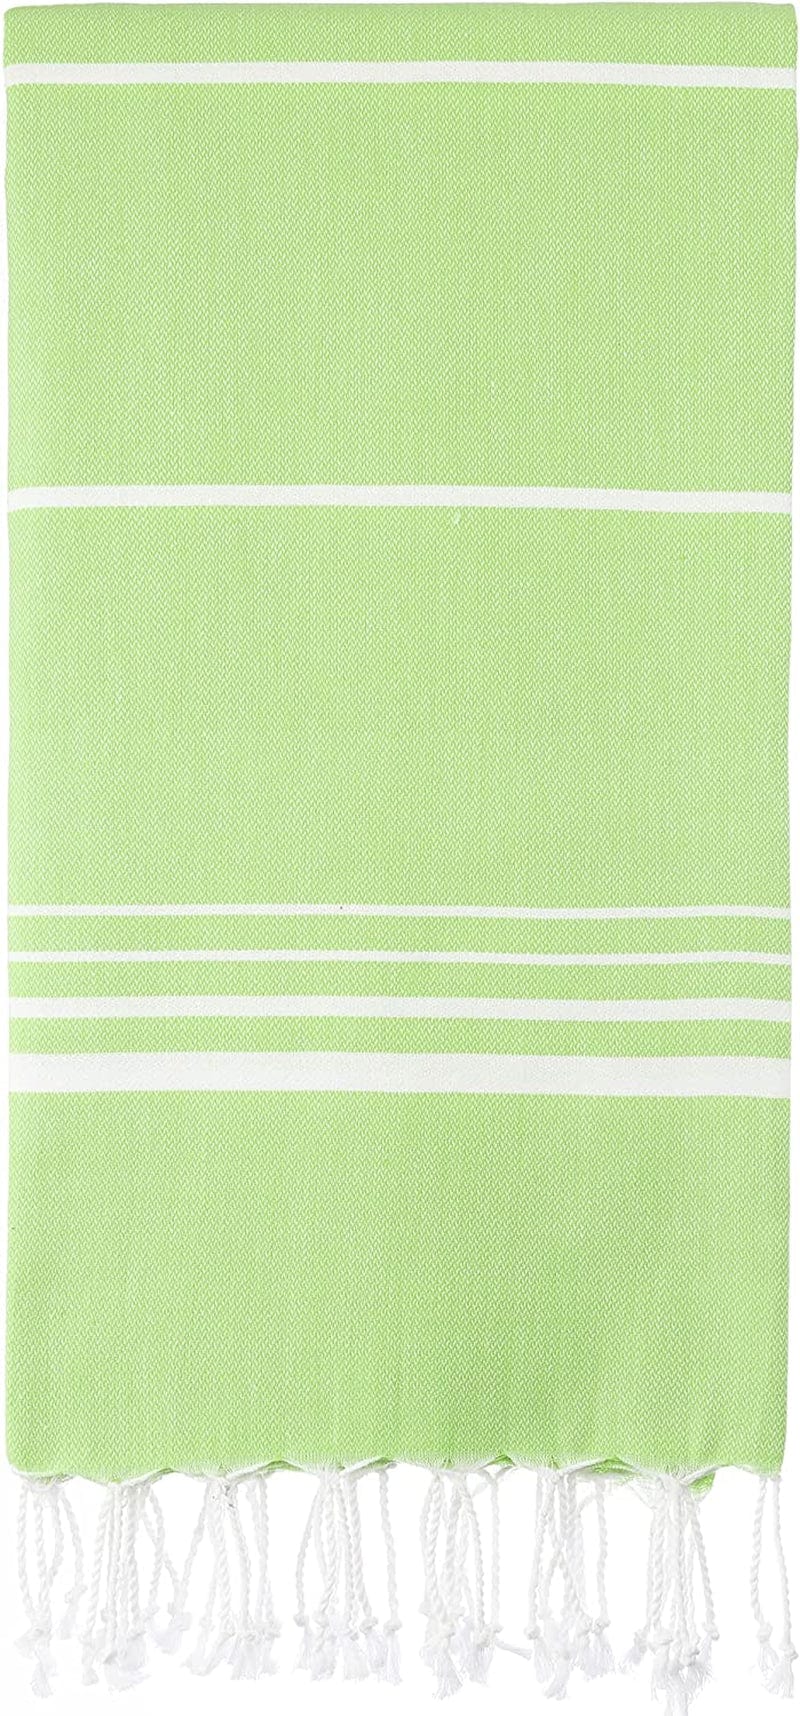 Cacala Turkish Beach Towels Quick Dry Prewashed for Soft Feel Extra Large Blanket Peshtemal for Bathroom, Travel, Pool, Swim, Yoga, Face, Hair and Gym Paradise, 37 in X 70 In, Aqua Home & Garden > Linens & Bedding > Towels Cacala Pistachio Green 37 in x 70 in 